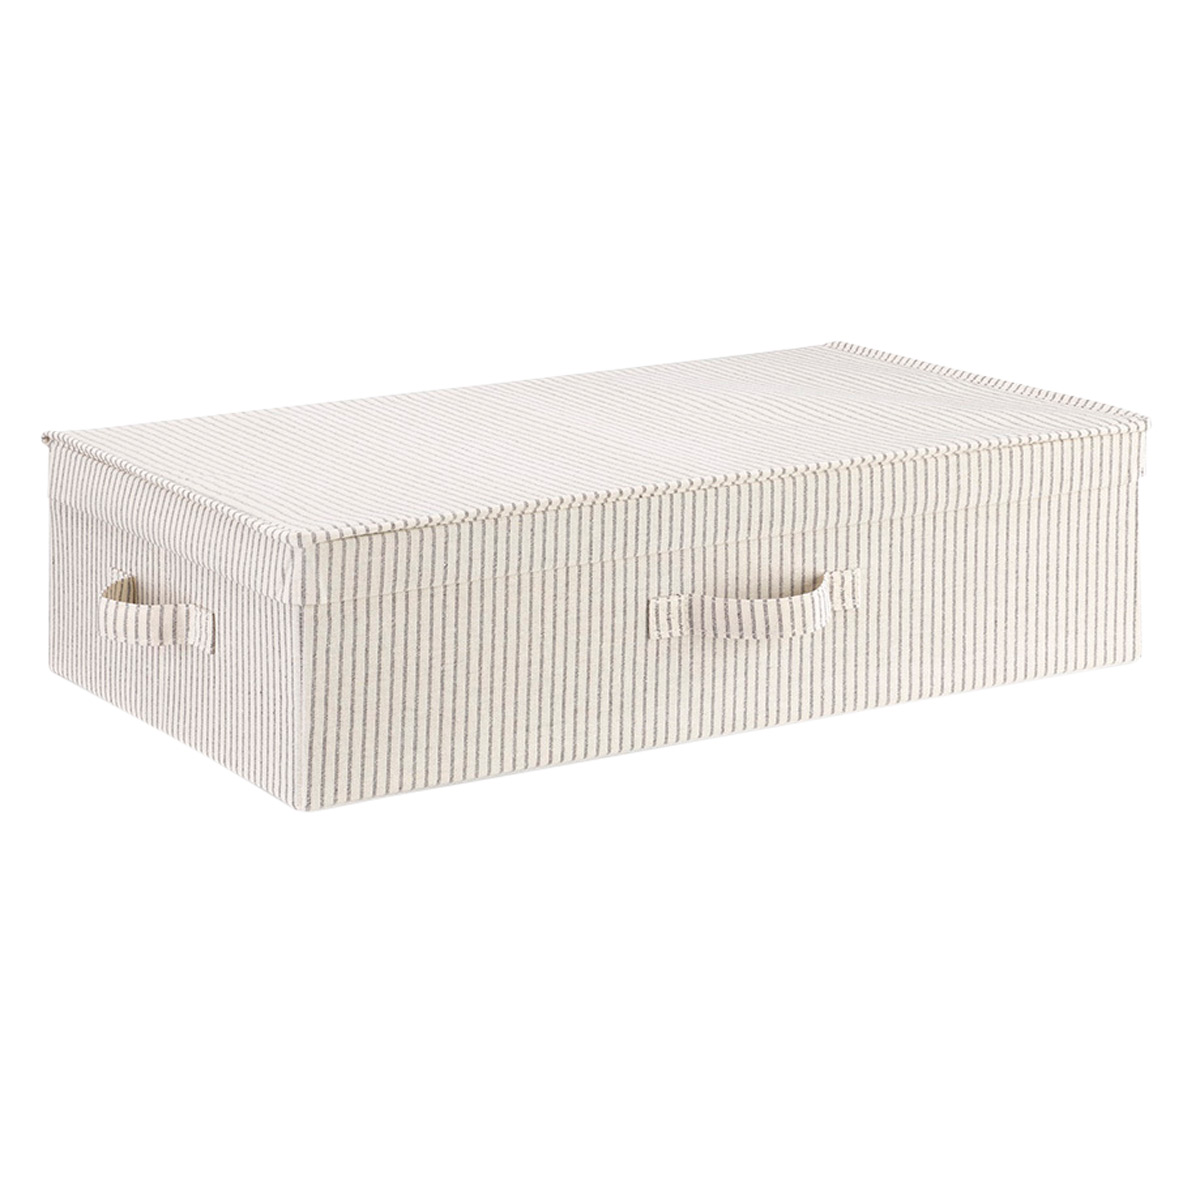 https://www.containerstore.com/catalogimages/469781/10071514-underbed-box-grey-stripe-ve.jpg